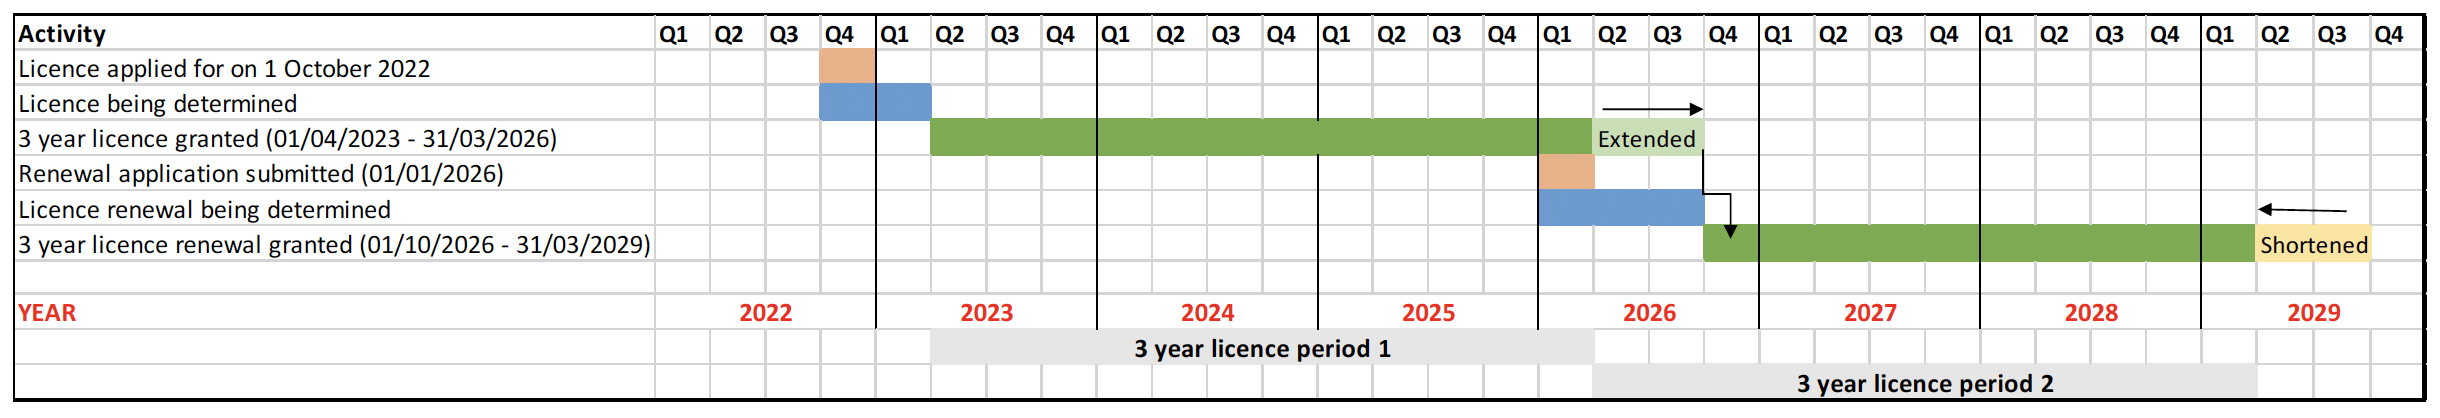 Gantt chart illustrating the process for renewing a licence where the application for renewal is made in advance of the original licence expiring but the application for renewal is not determined until after the original licence has expired.